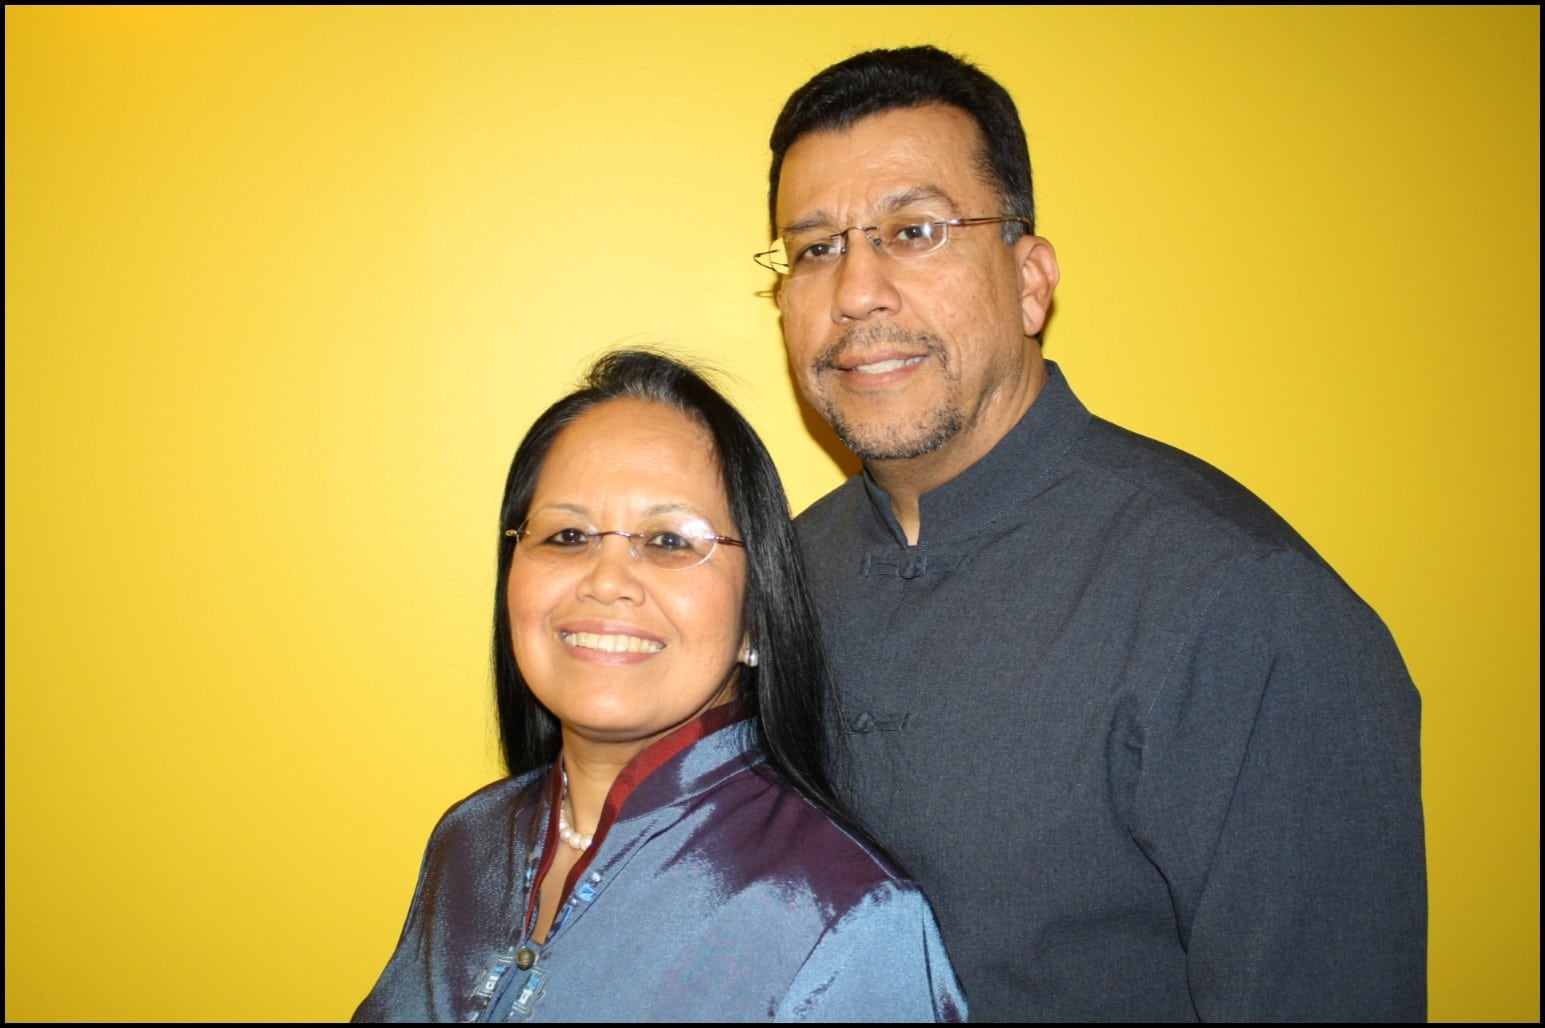 The Brooklyn Tabernacle Pastor Alland and Marilyn ILdefonso